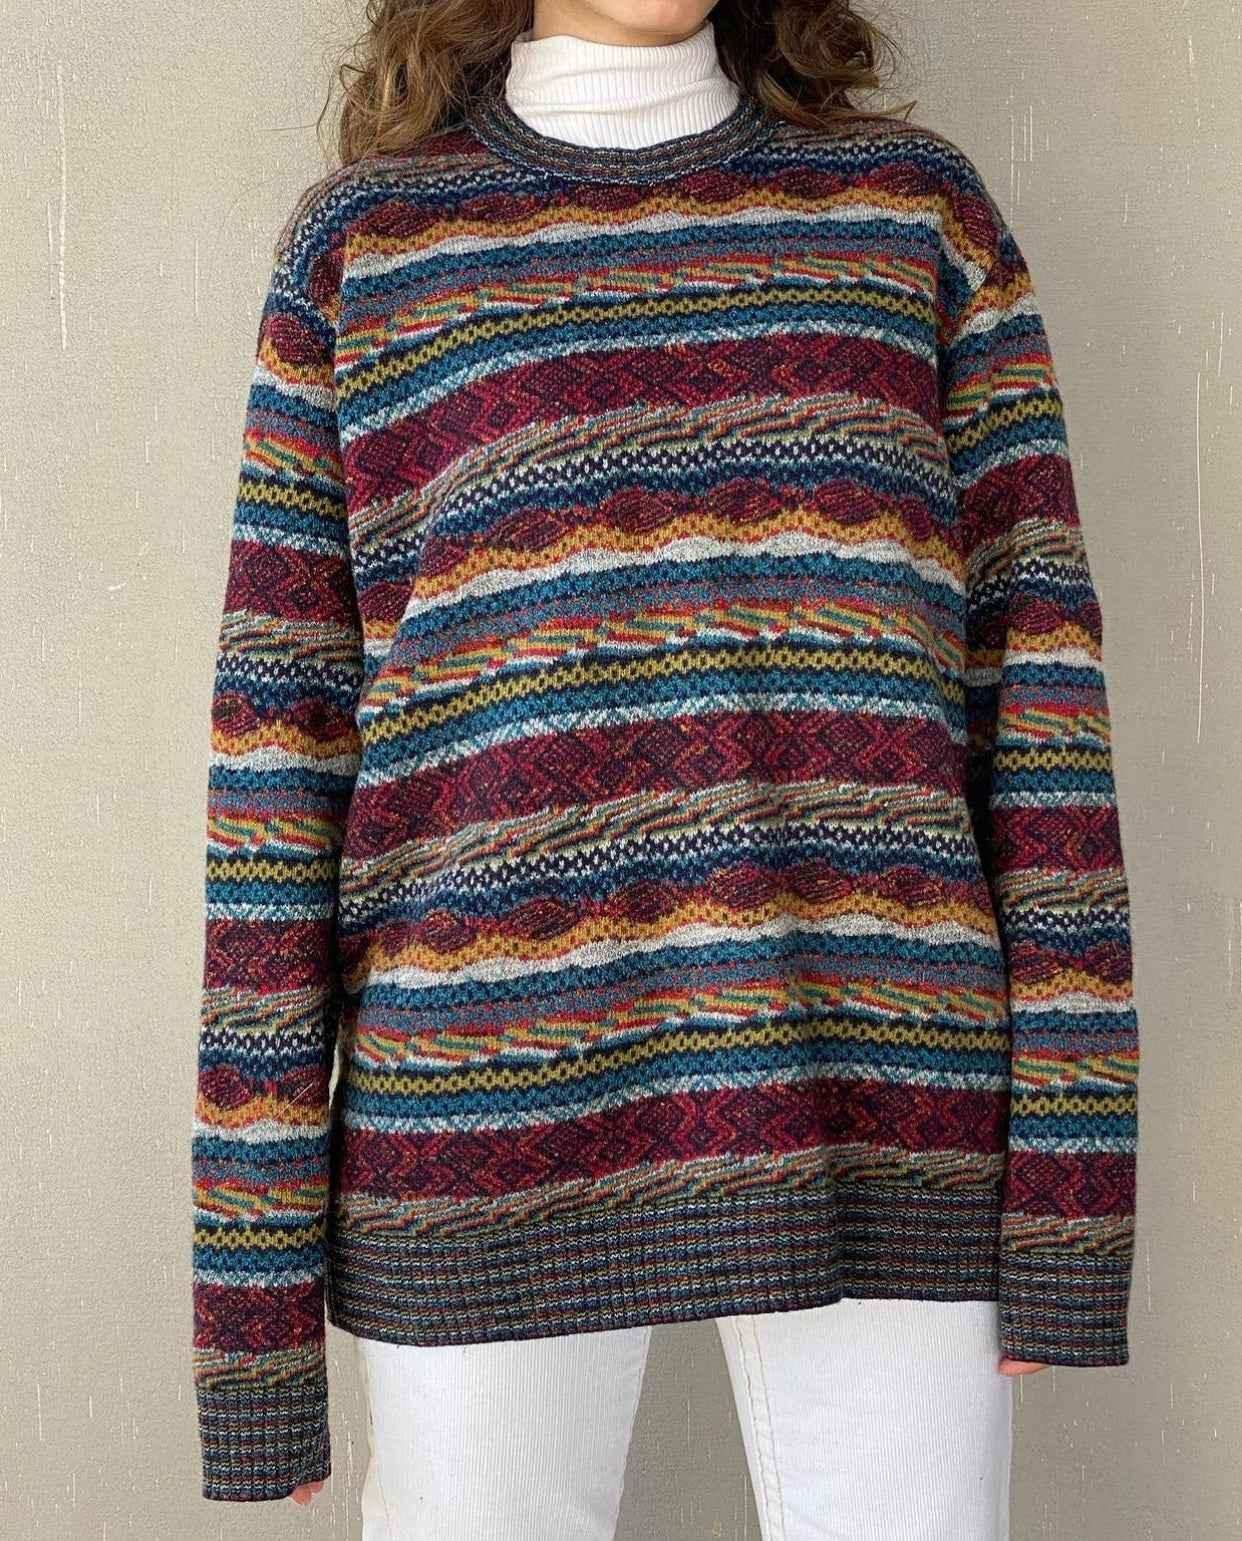 Vintage 80s/90s Norm Thompson patterned knitted sweater - Balagan Vintage